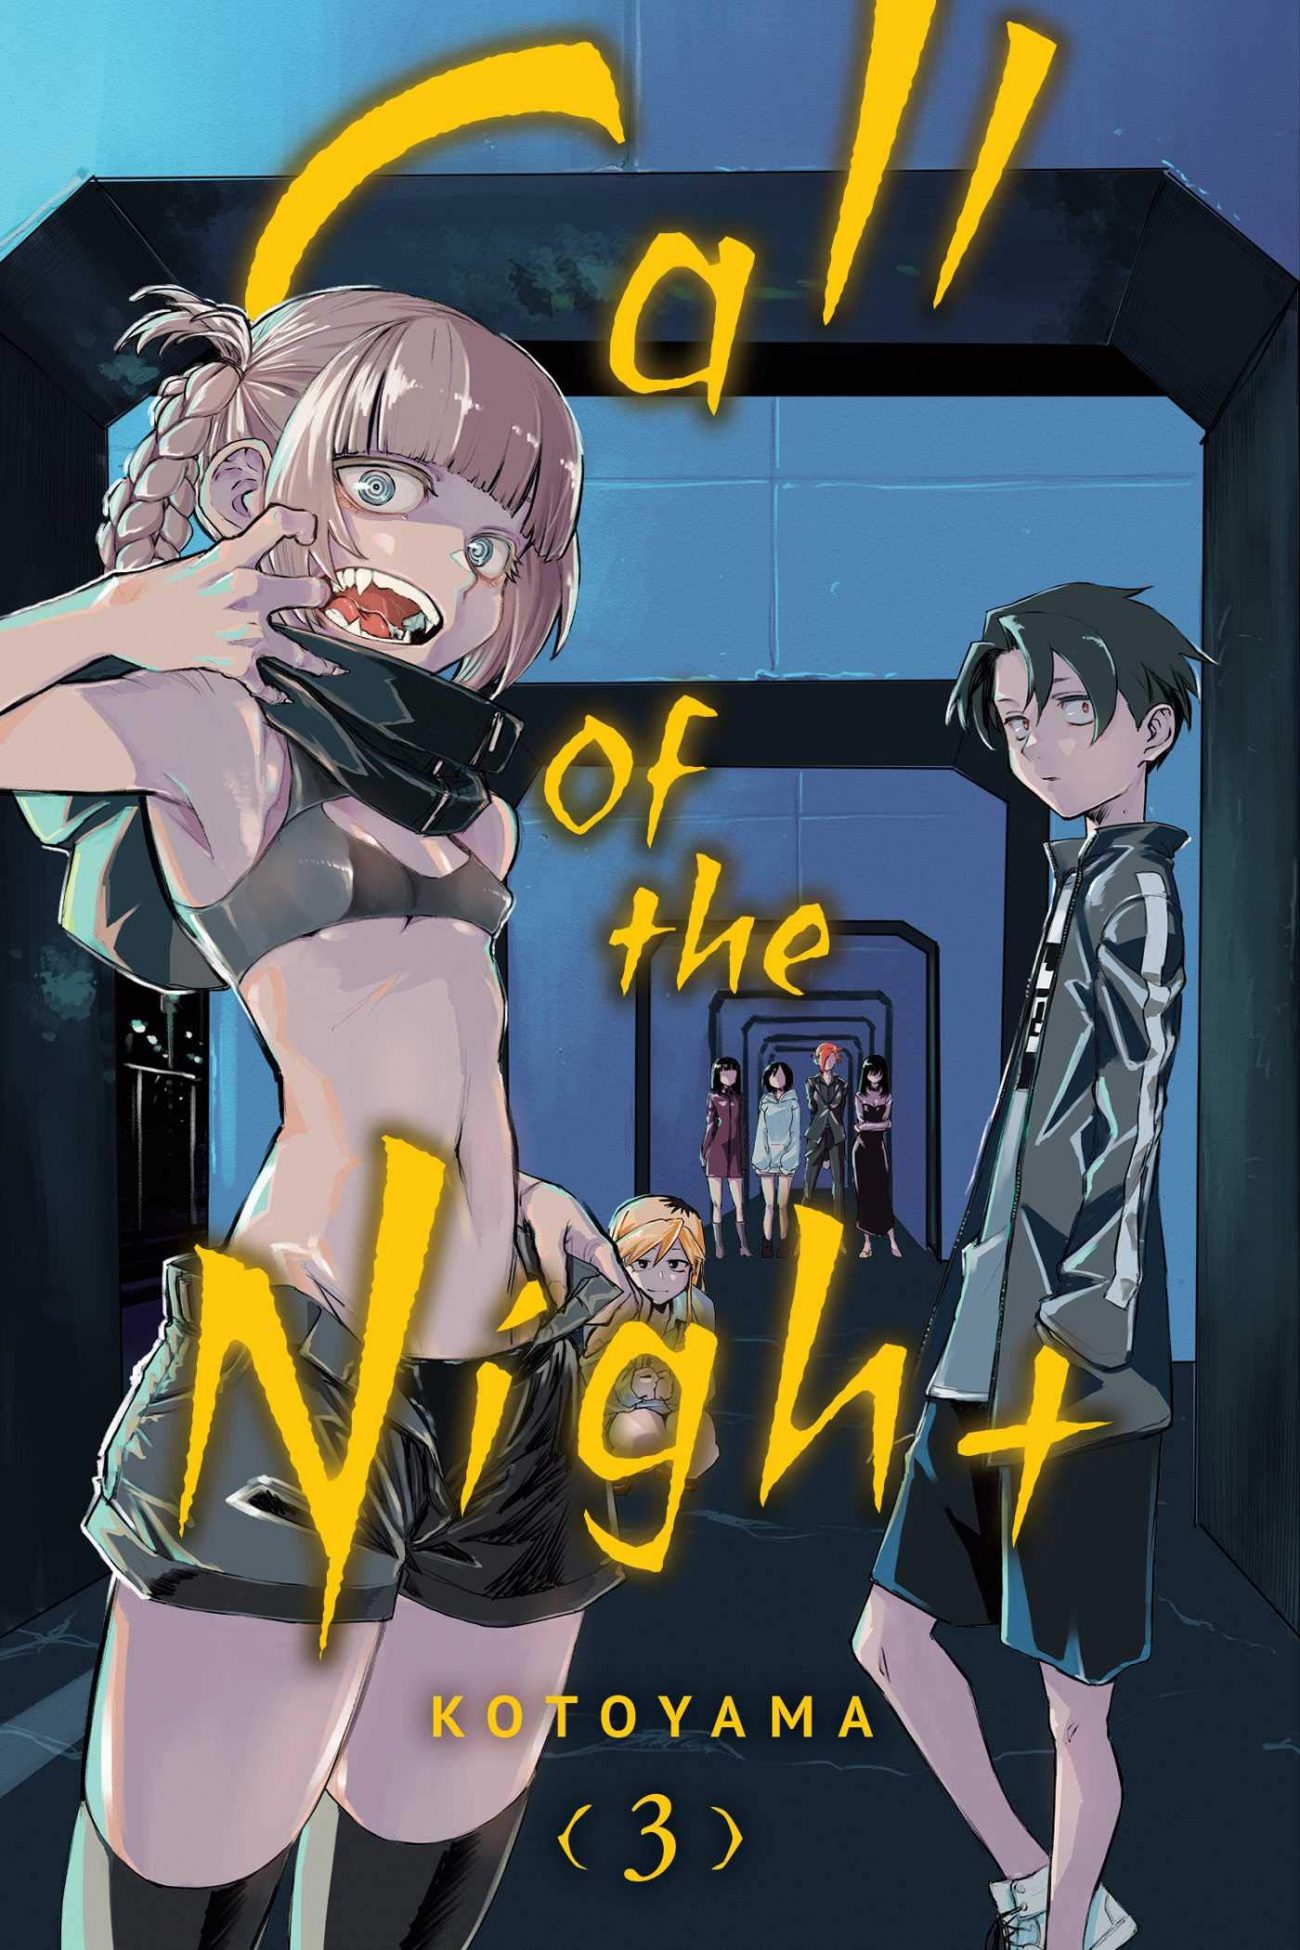 A review of Call of the Night